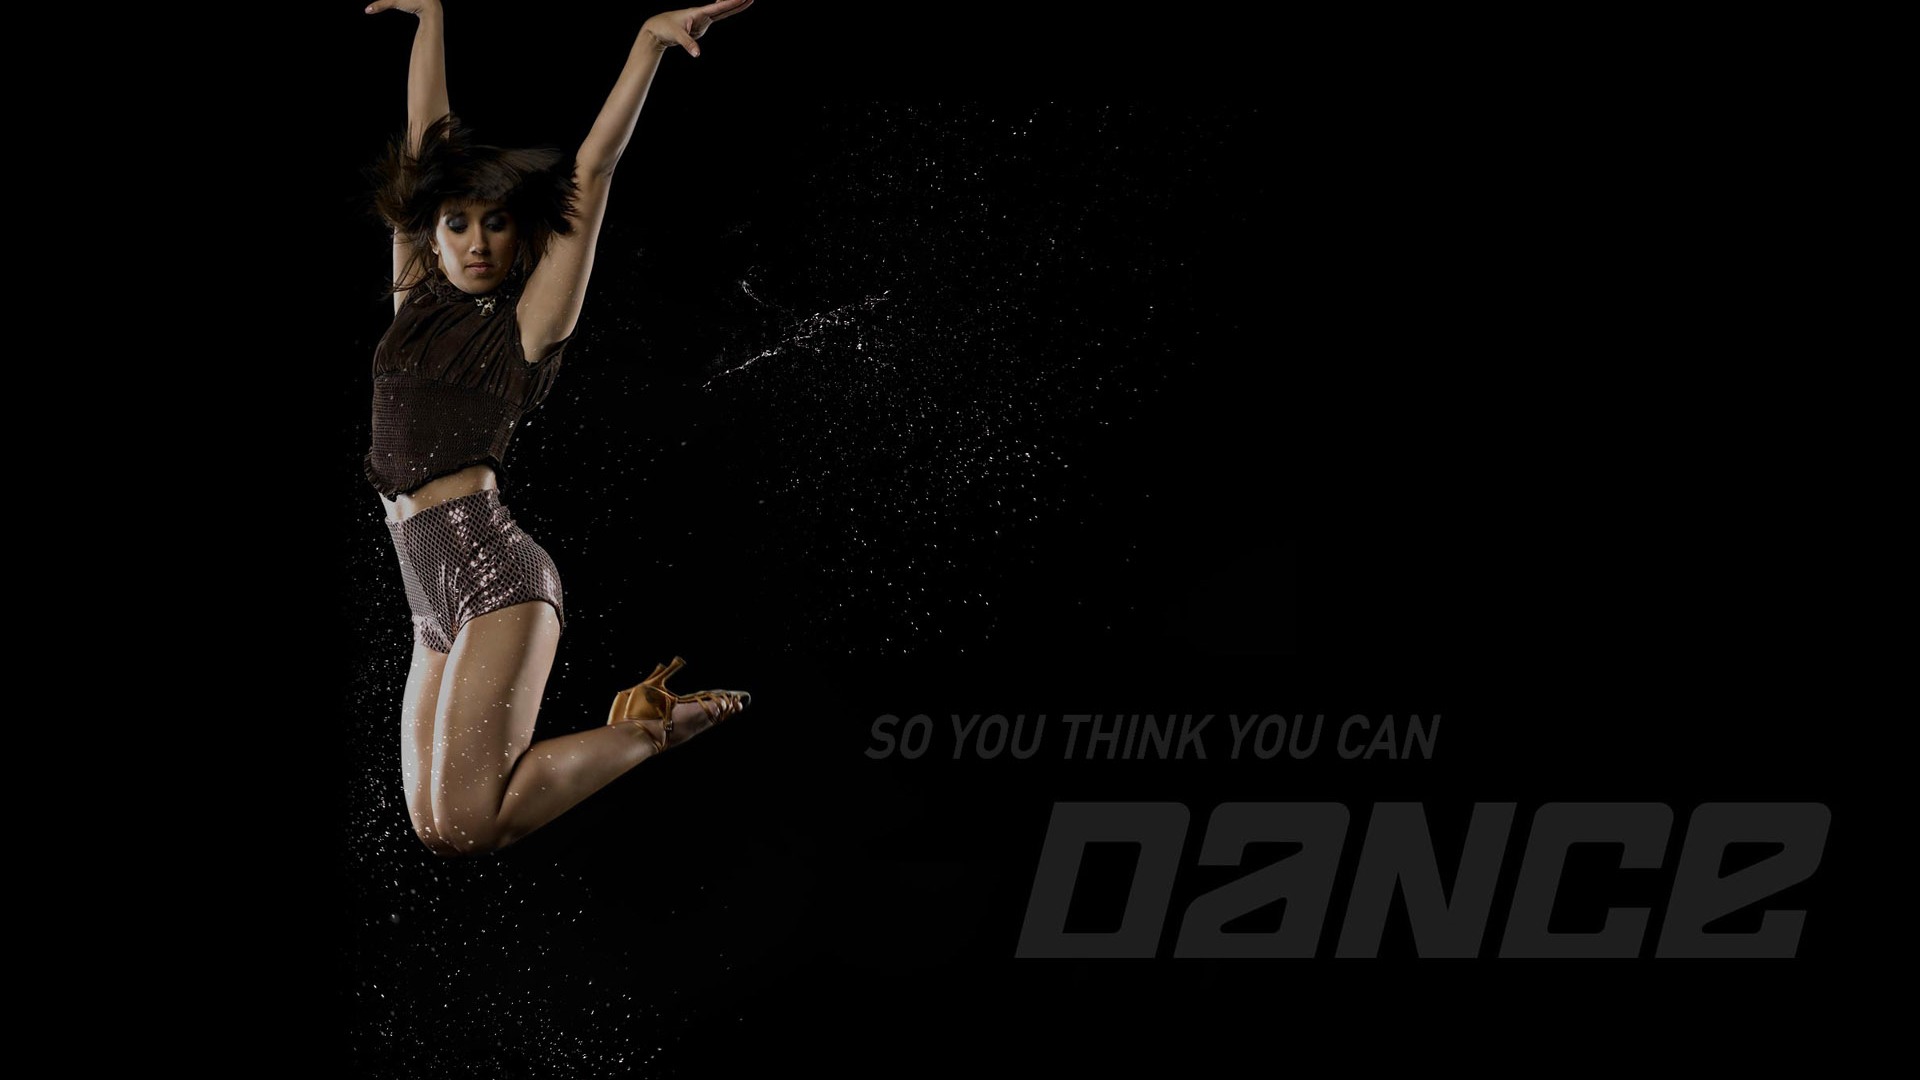 So You Think You Can Dance wallpaper (1) #11 - 1920x1080